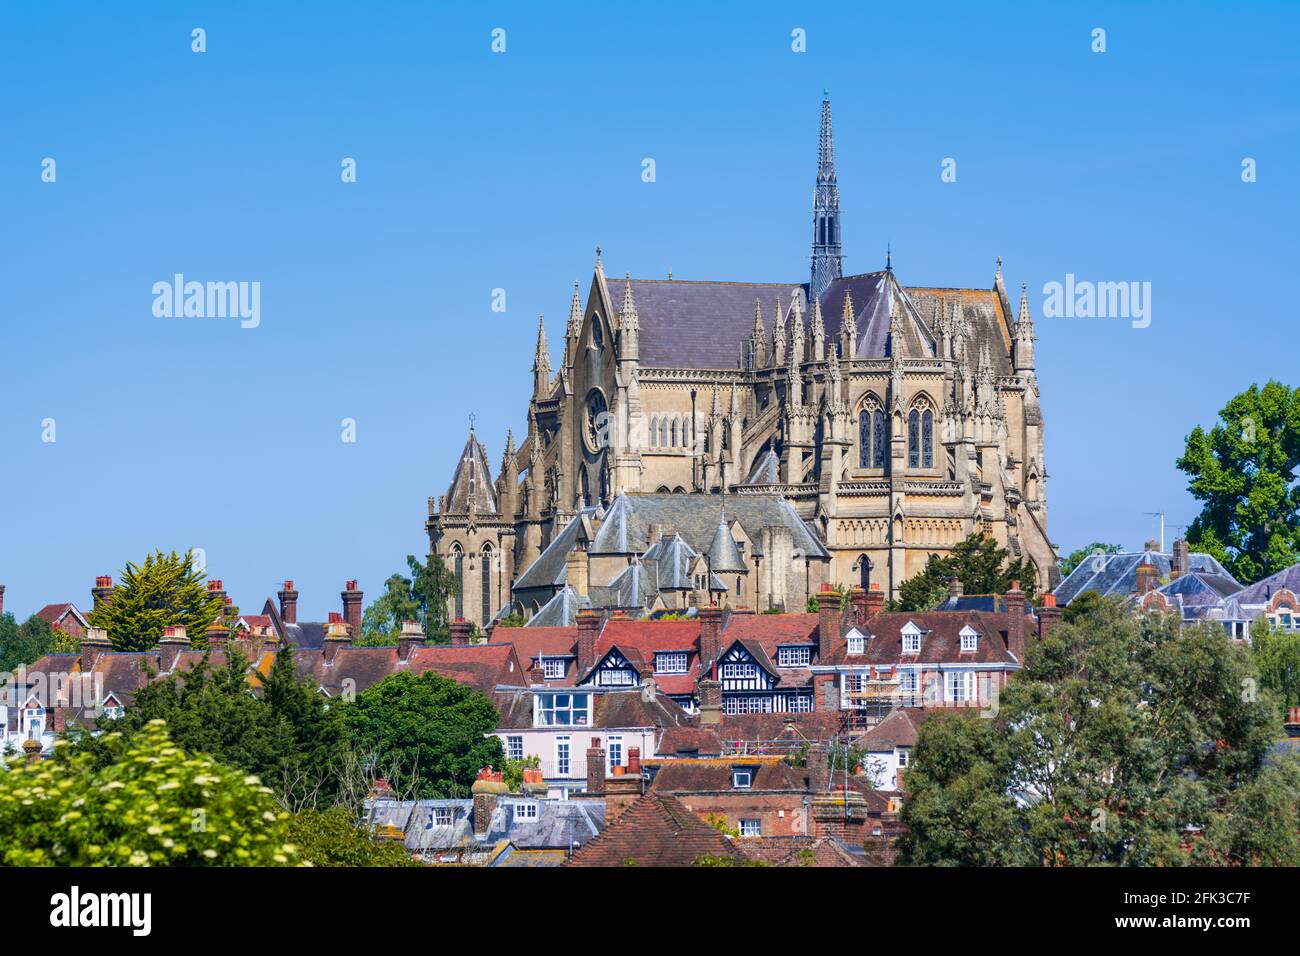 Arundel Cathedral, a Roman Catholic cathedral with the architecture style of Gothic Revival in Arundel, West Sussex, England, UK. British cathedral. Stock Photo